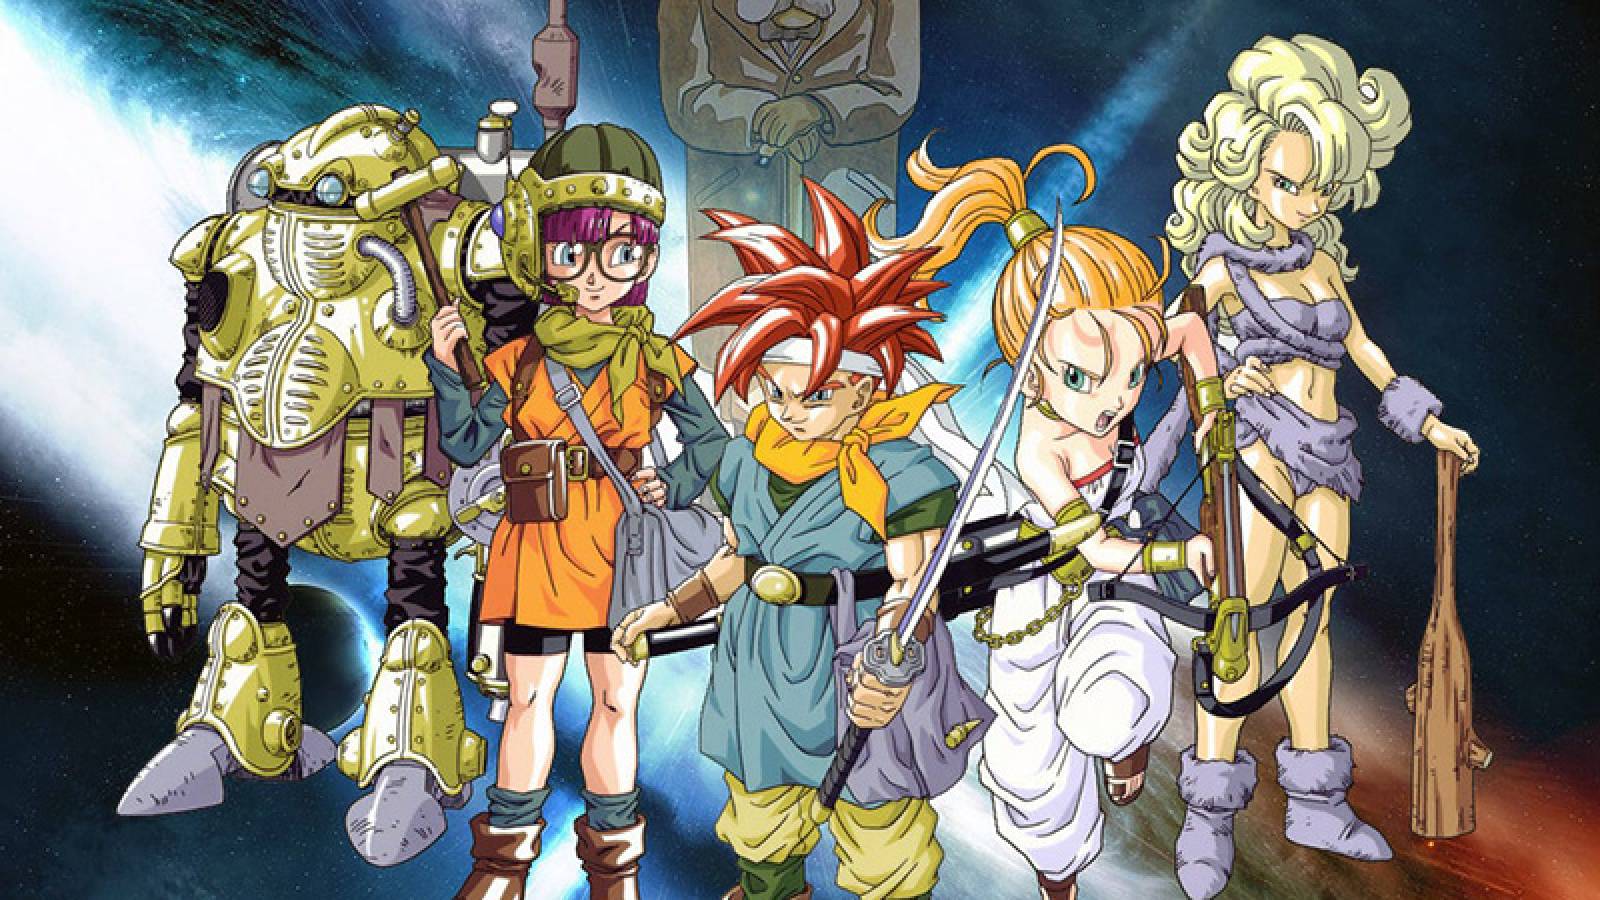 Games with the longest timeline: Chrono Trigger